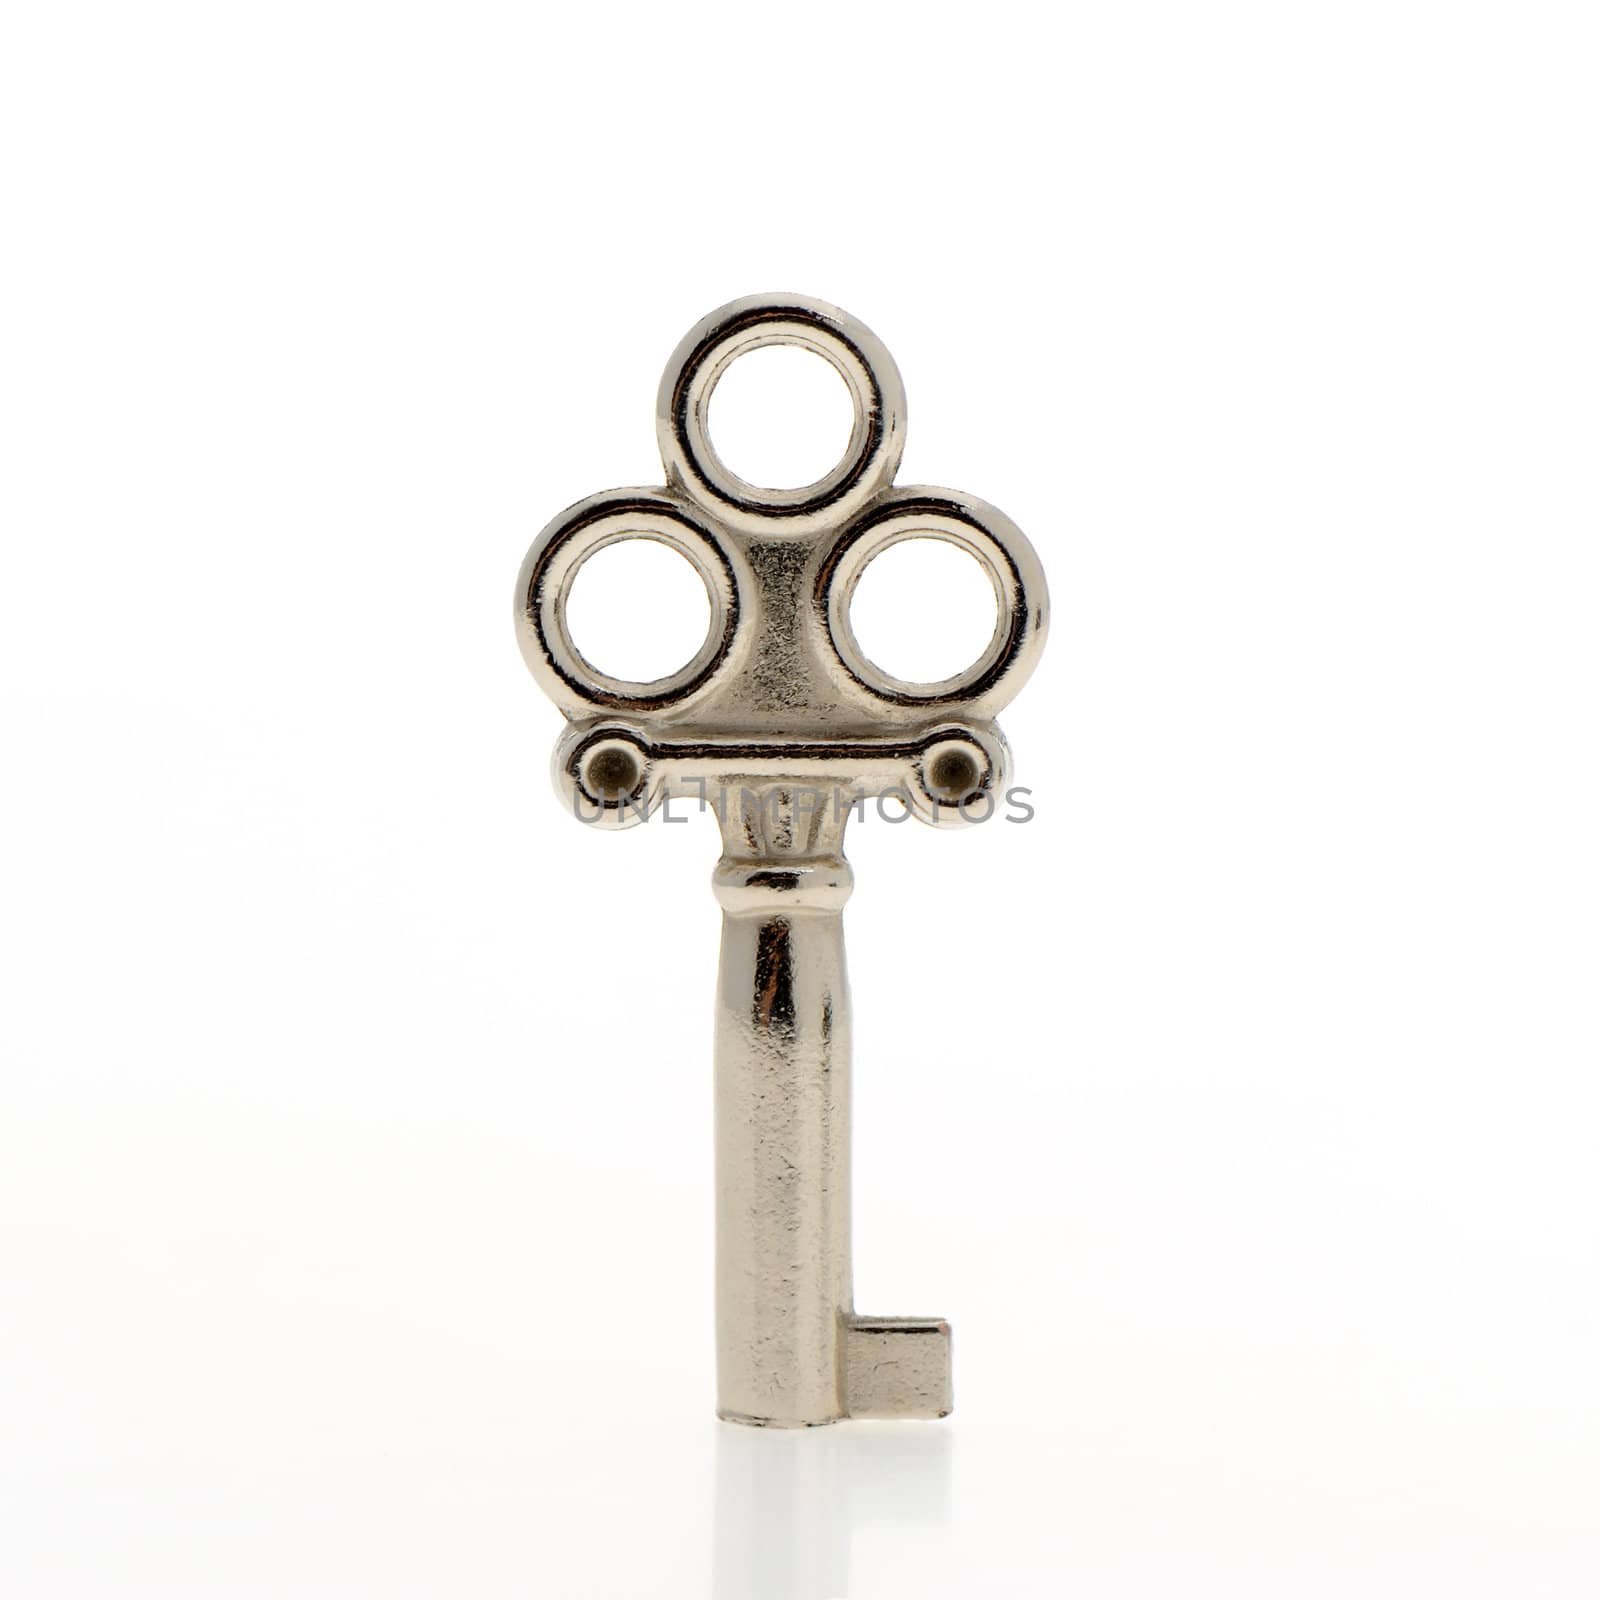 Decorative key. An iron key from the lock isolated on a white background